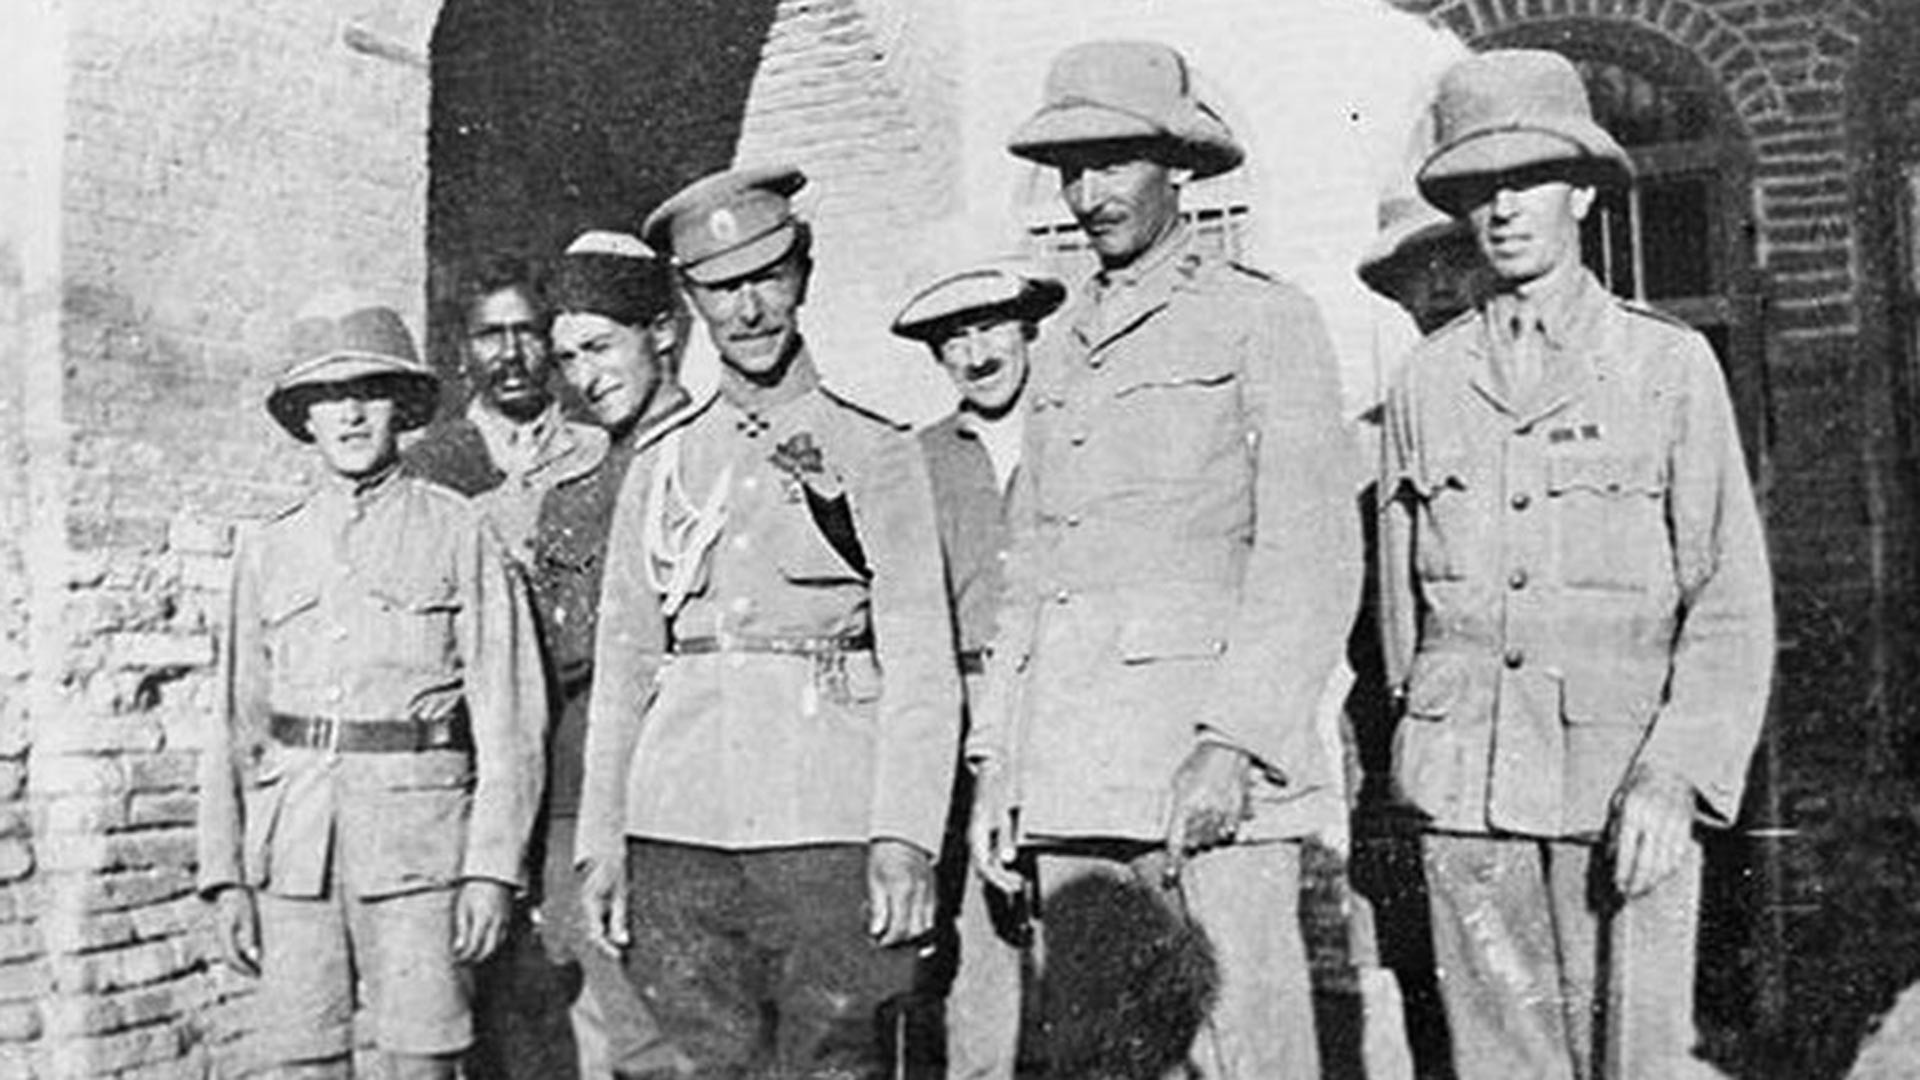 Russian and British officers in Mesopotamia, 1916.